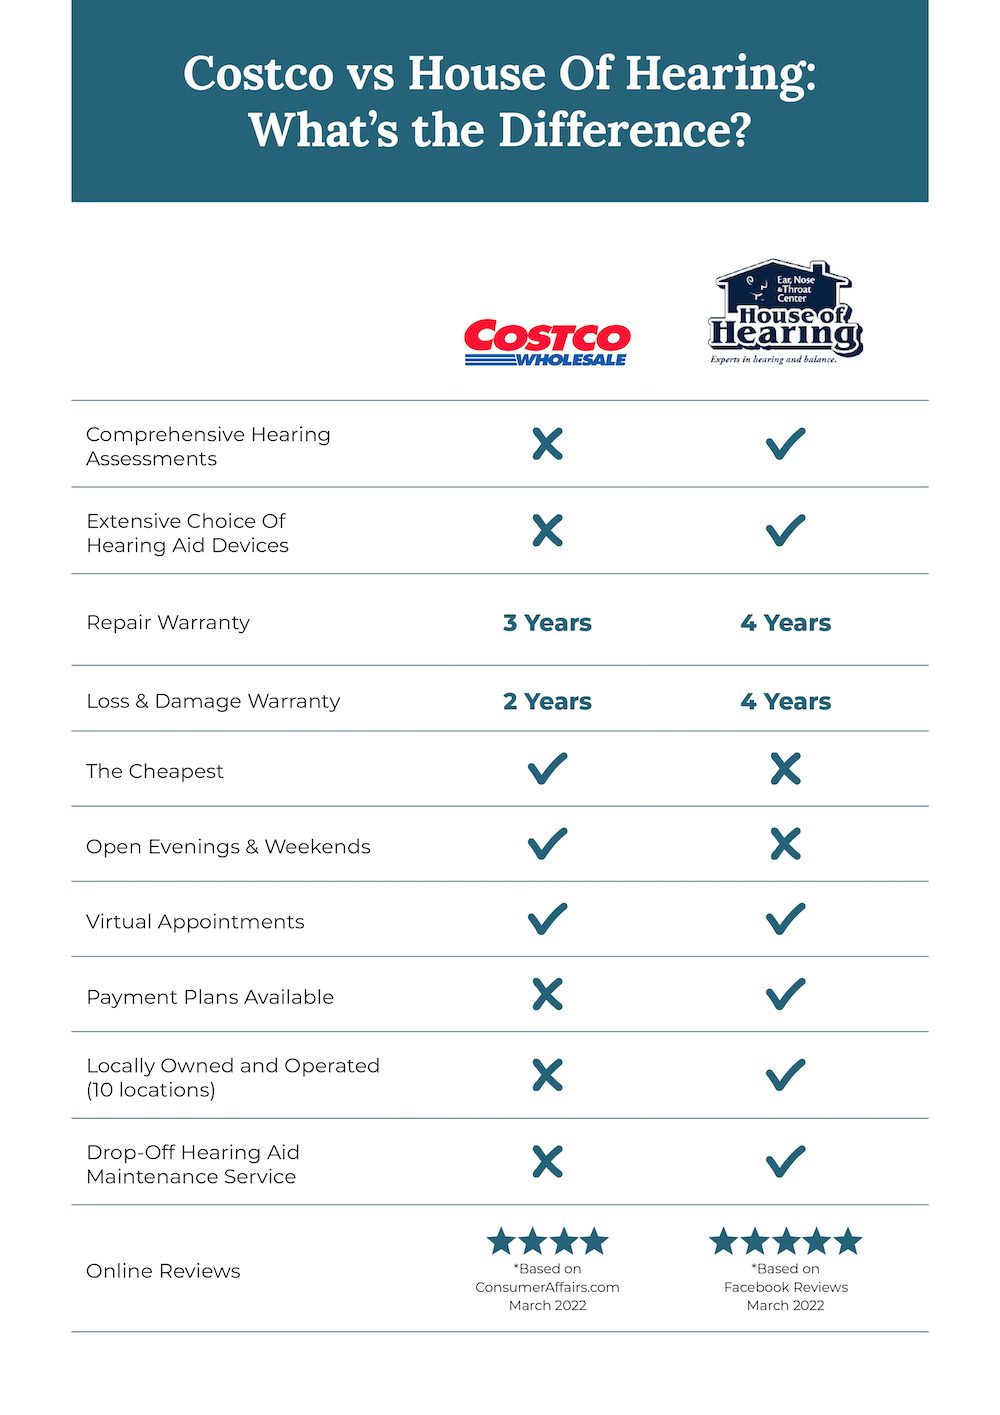 Chart showing difference in Costco vs House of Hearing hearing aids